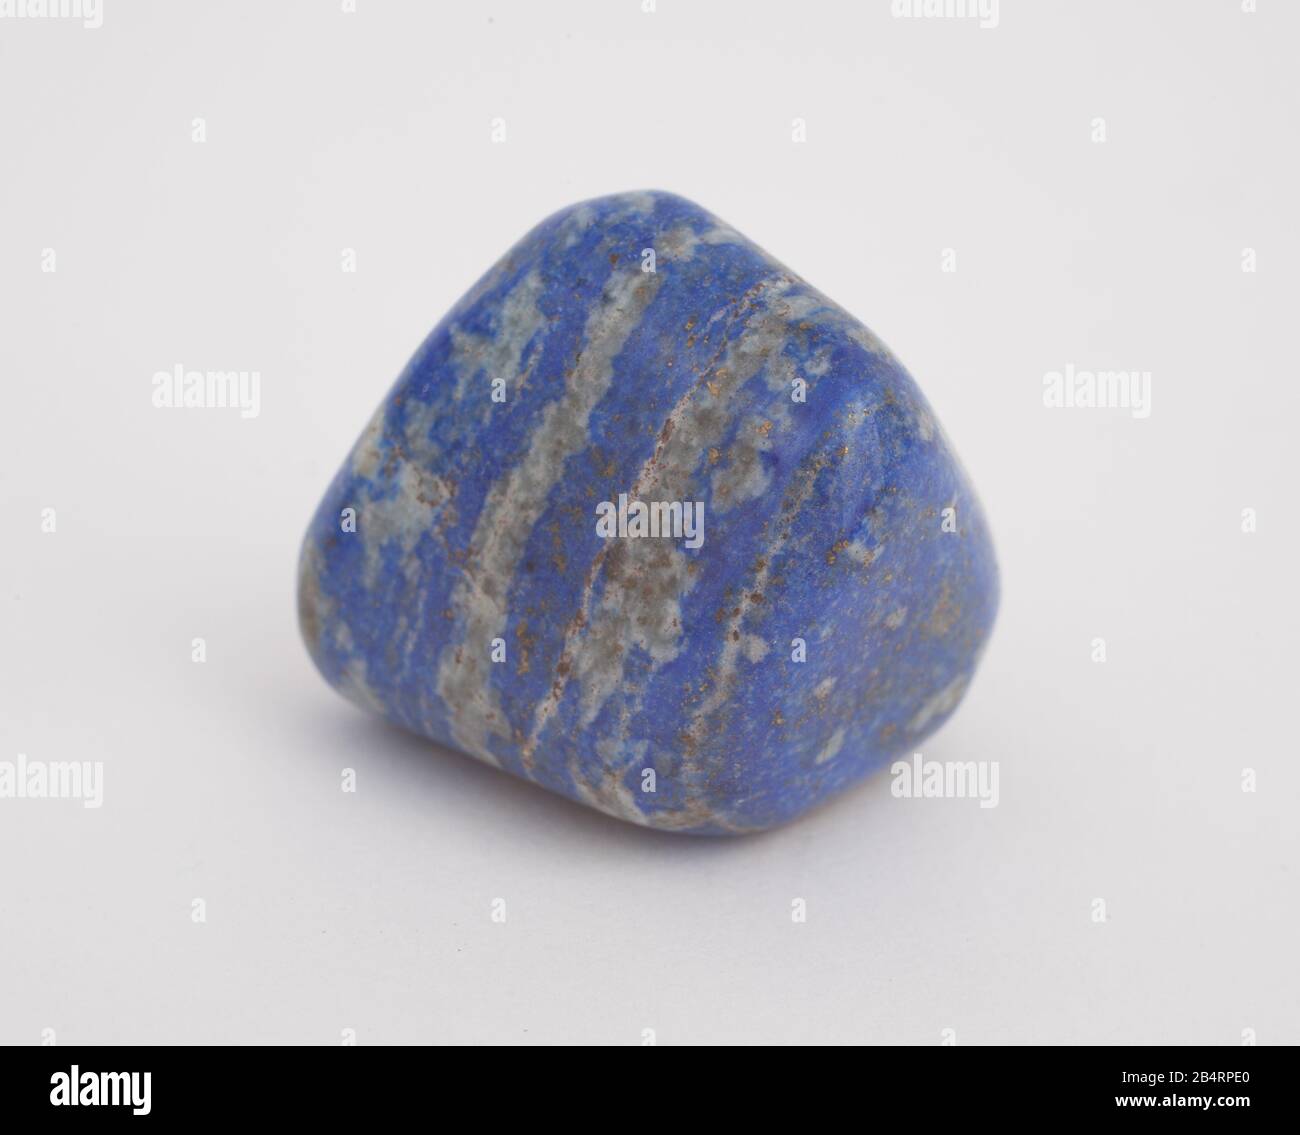 A blue grey gemstone photographed against a white background Stock Photo